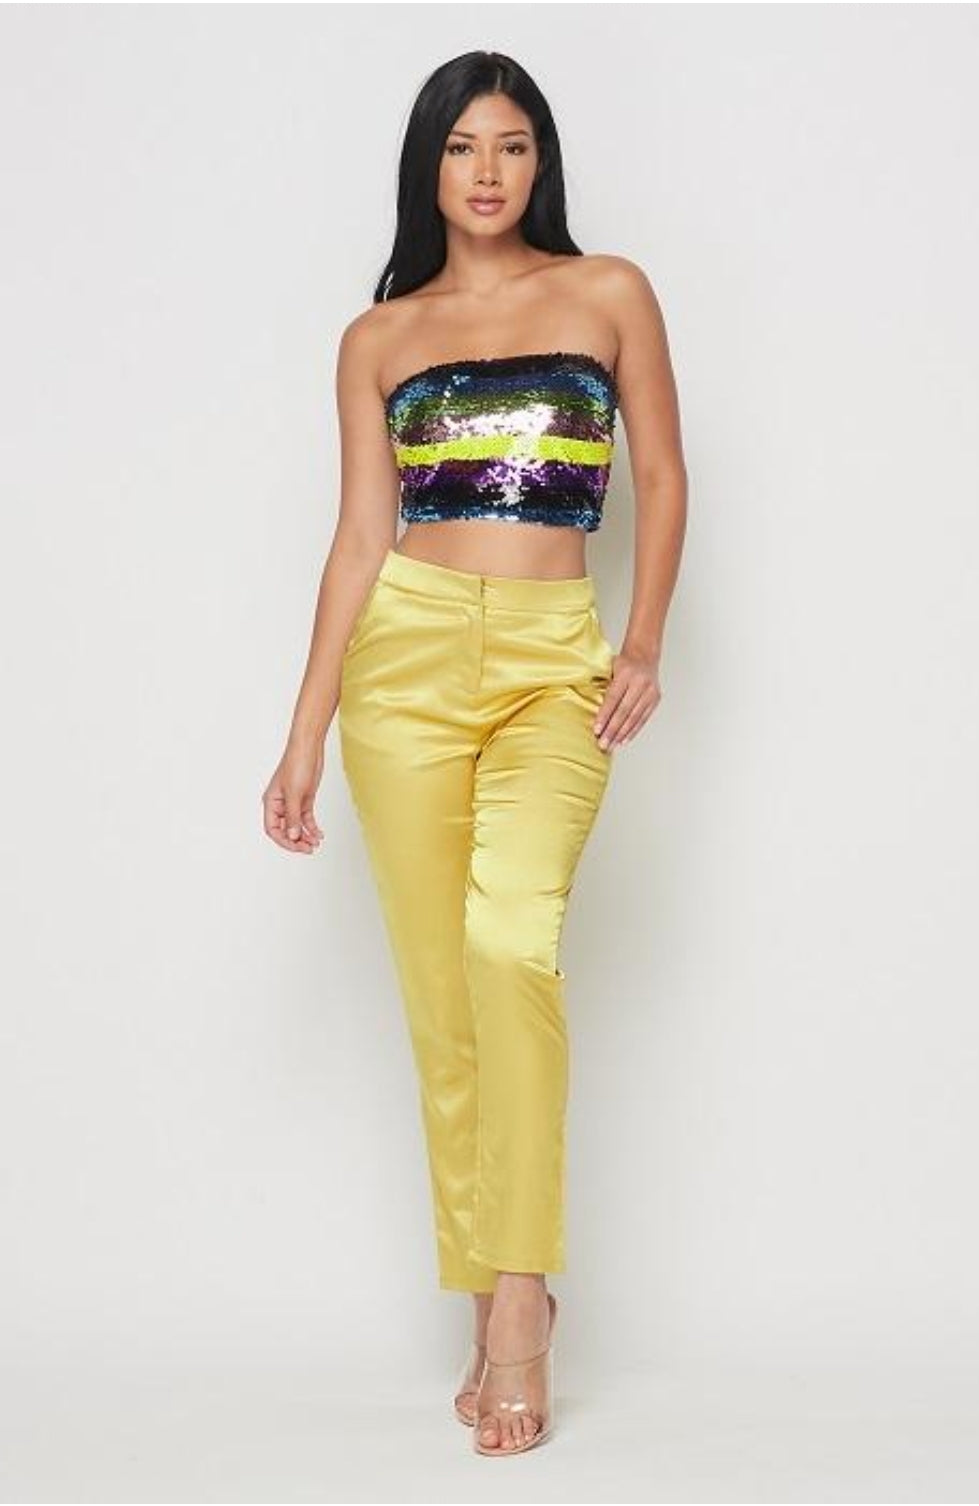 A SEQUIN TUBE TOP AND SATIN PANTS SET